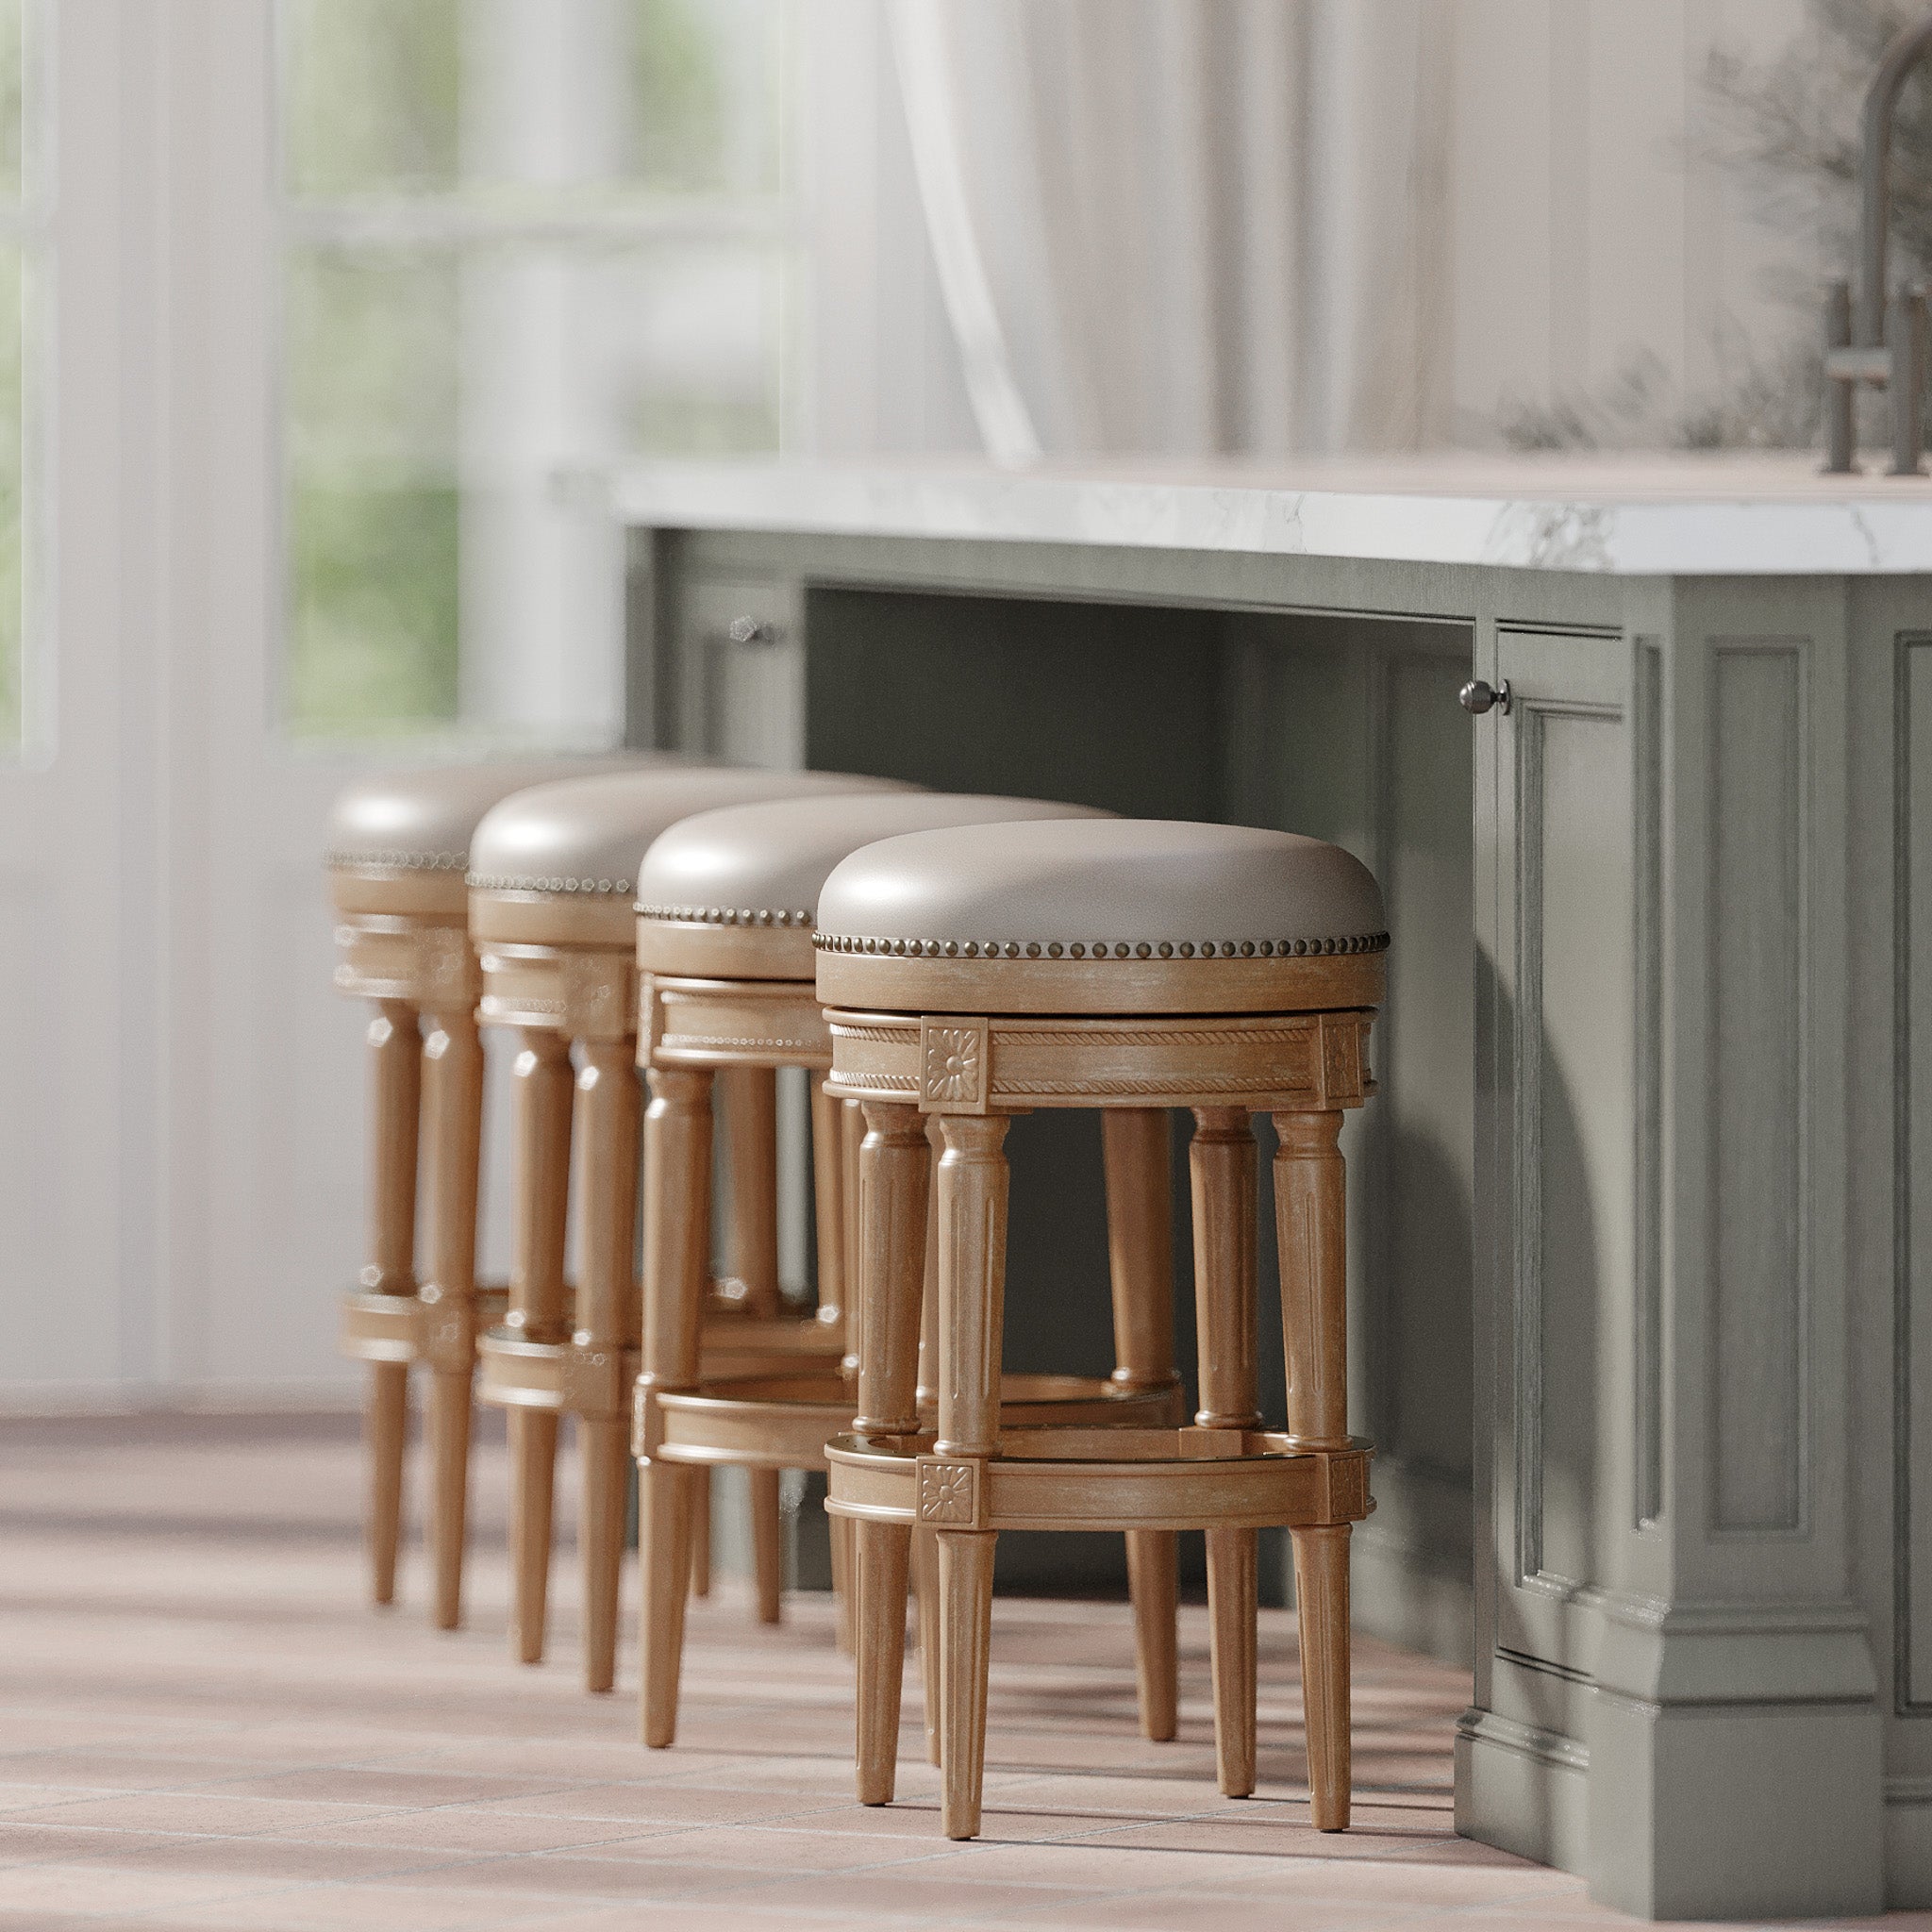 Pullman Backless Bar Stool in Weathered Oak Finish with Avanti Bone Vegan Leather in Stools by Maven Lane